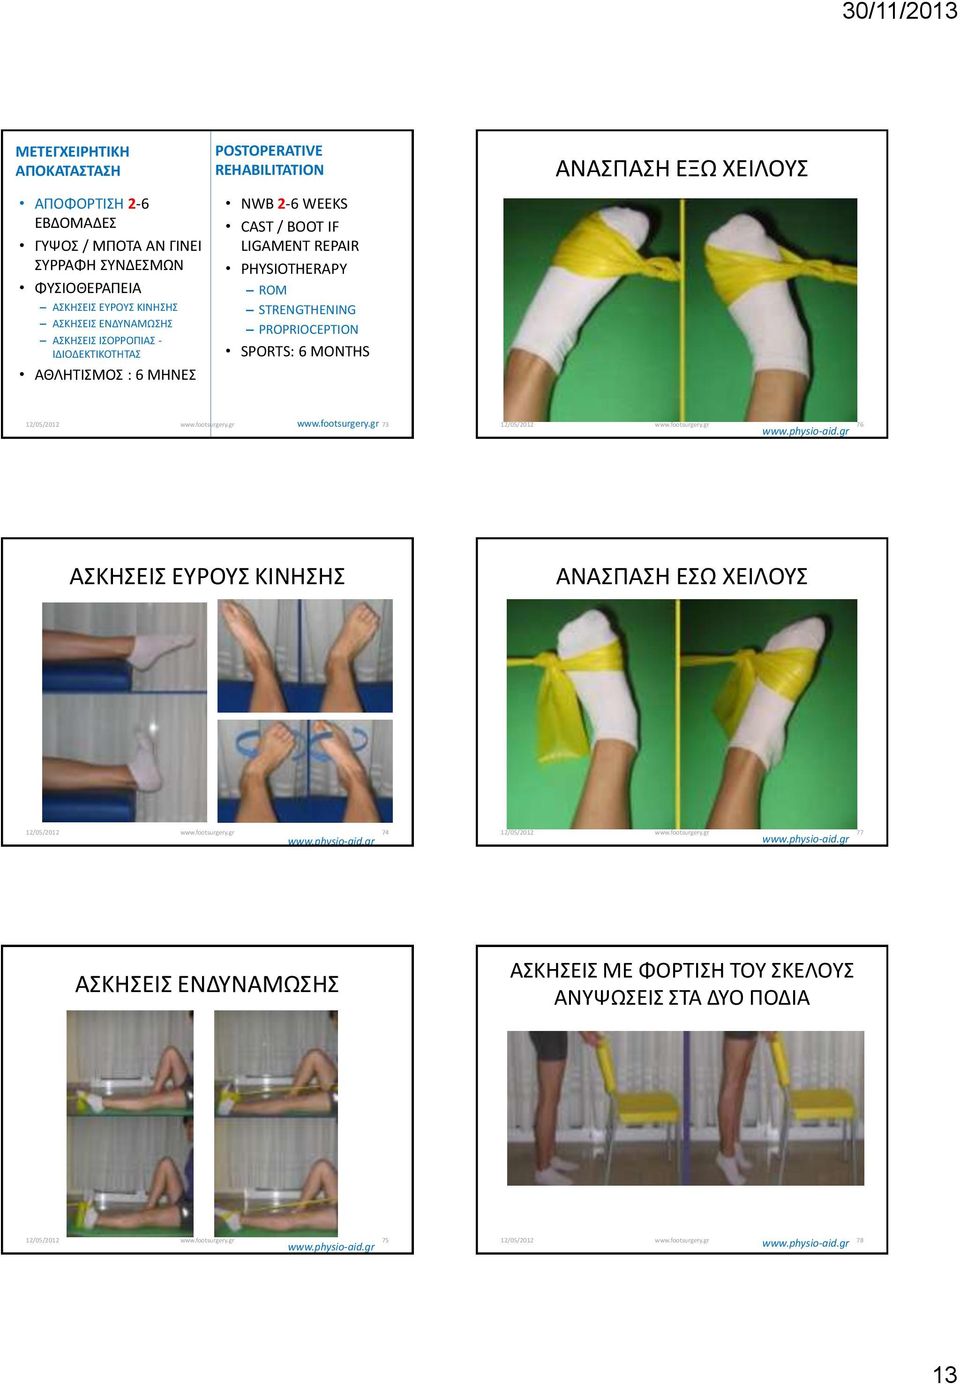 WEEKS CAST / BOOT IF LIGAMENT REPAIR PHYSIOTHERAPY ROM STRENGTHENING PROPRIOCEPTION SPORTS: 6 MONTHS ΑΝΑΣΠΑΣΗ ΕΞΩ ΧΕΙΛΟΥΣ 73 76